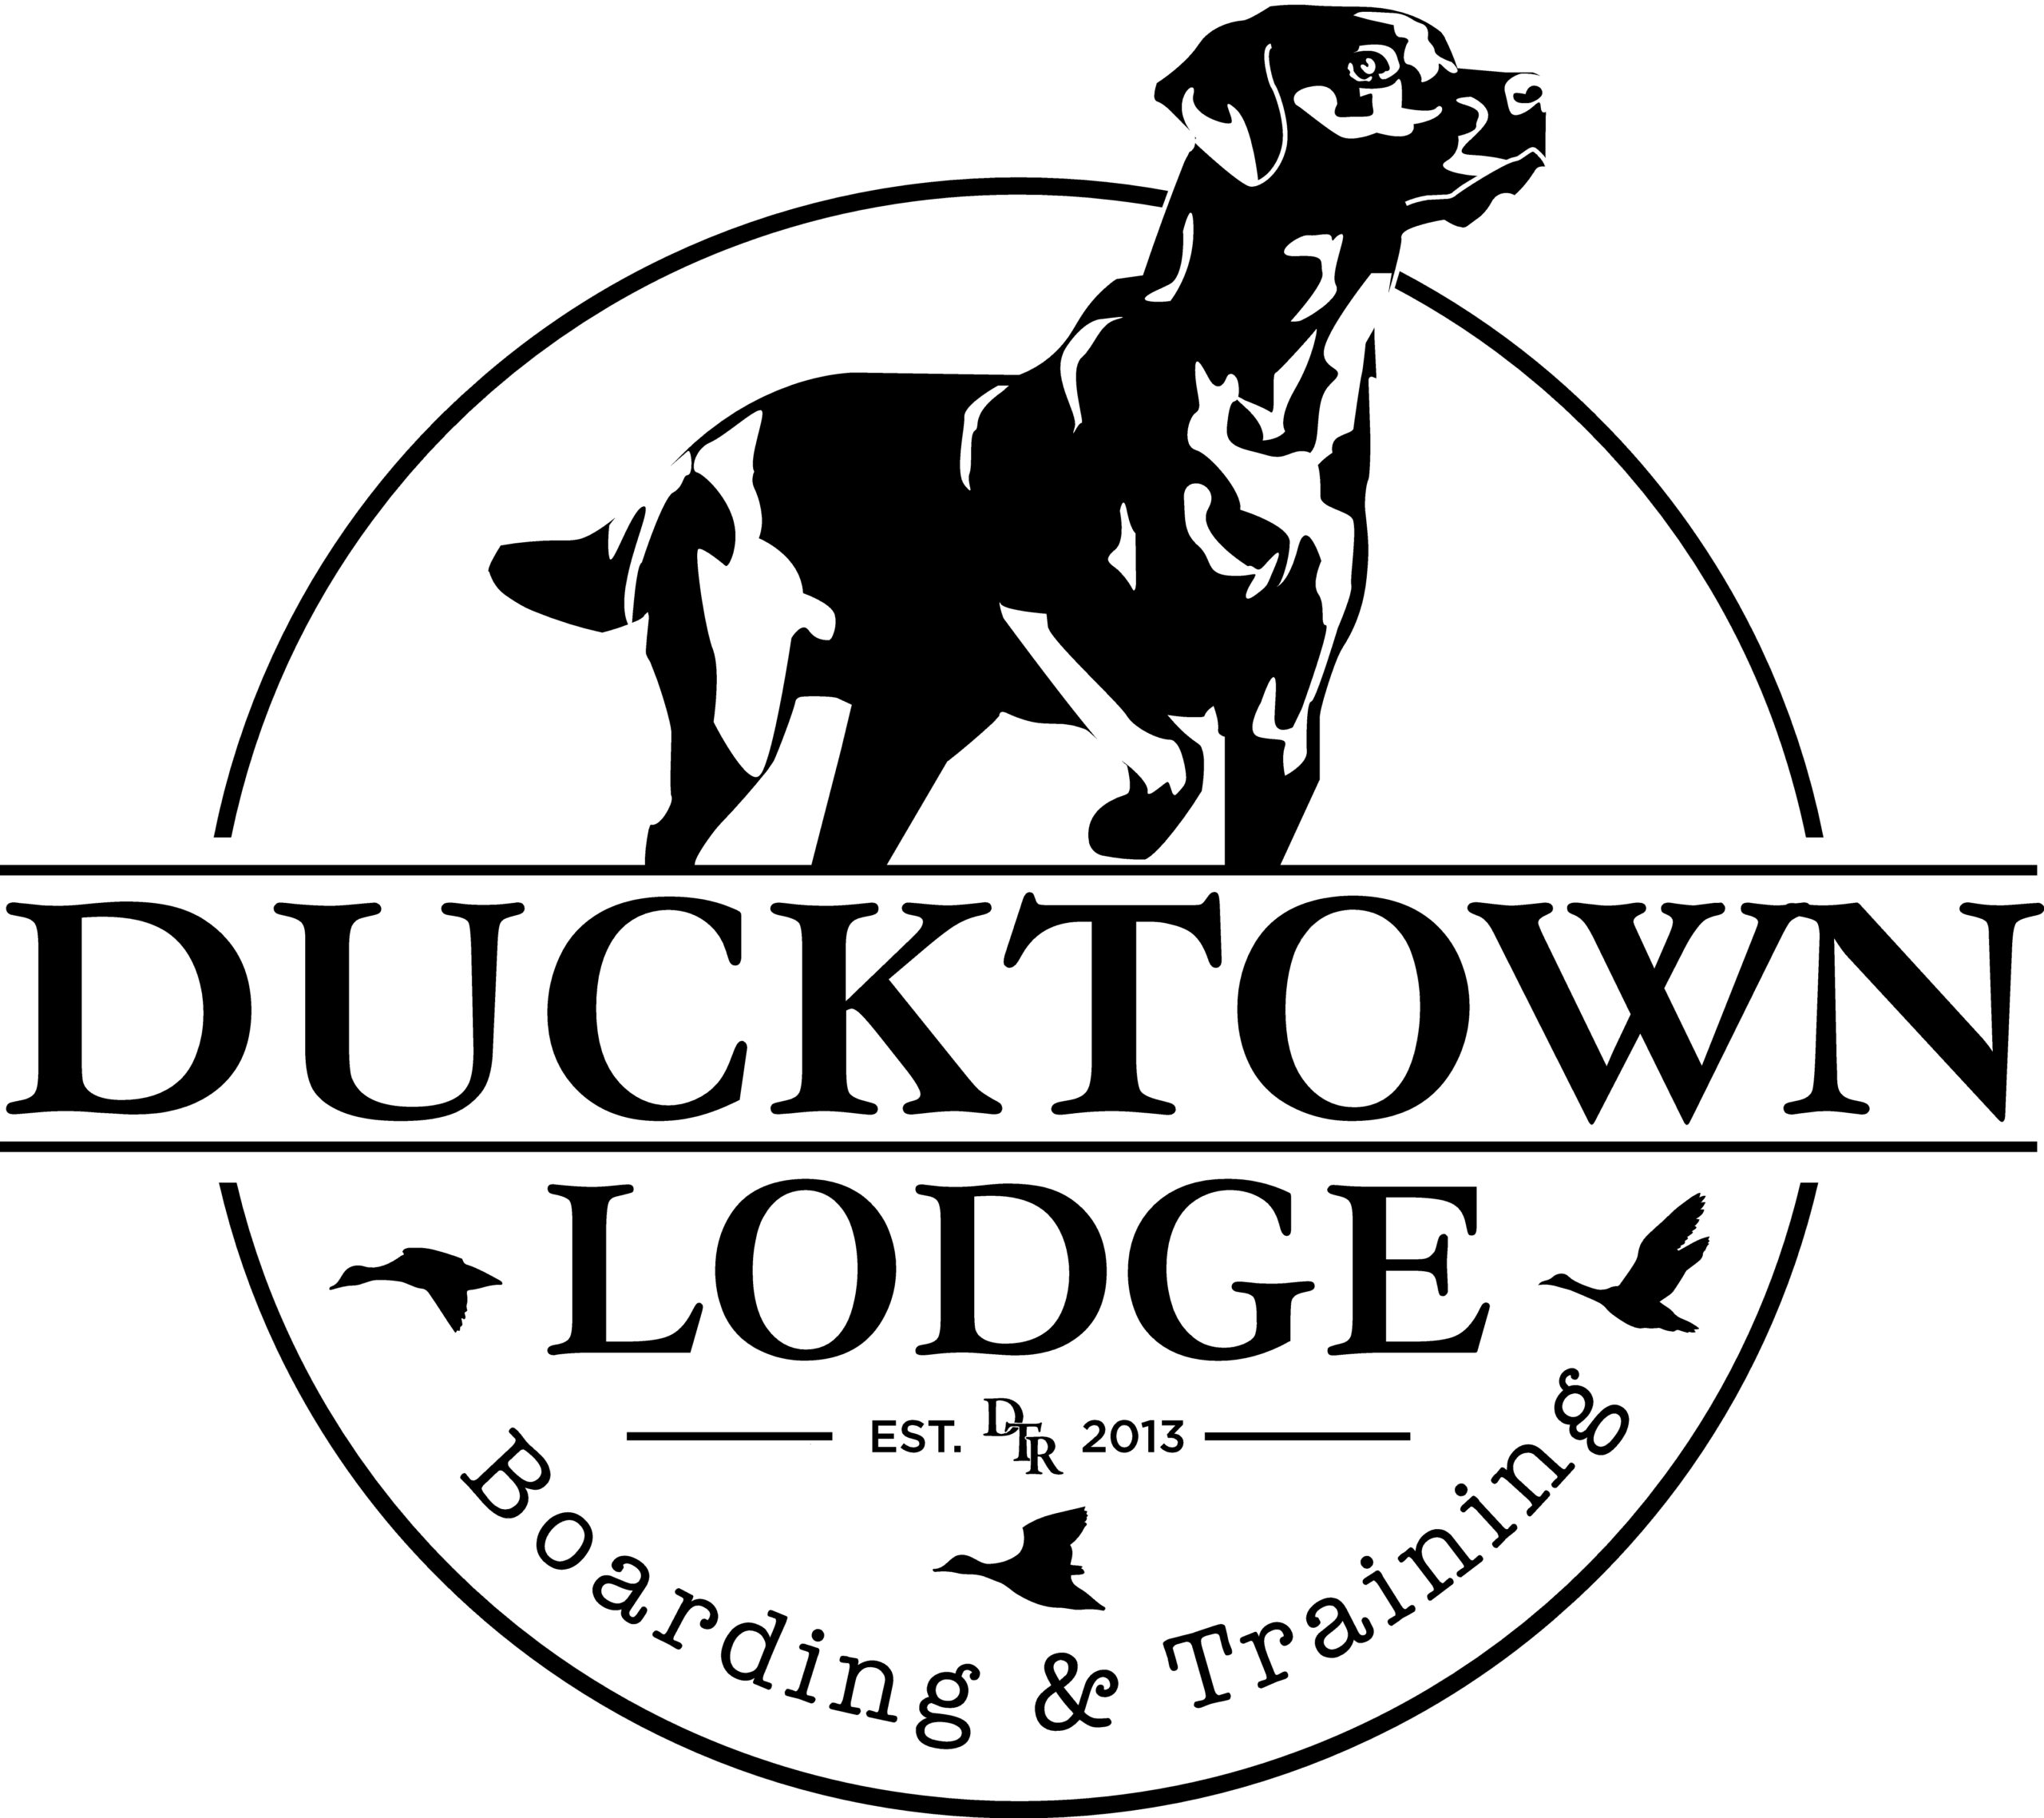 A black and white logo of ducktown lodge